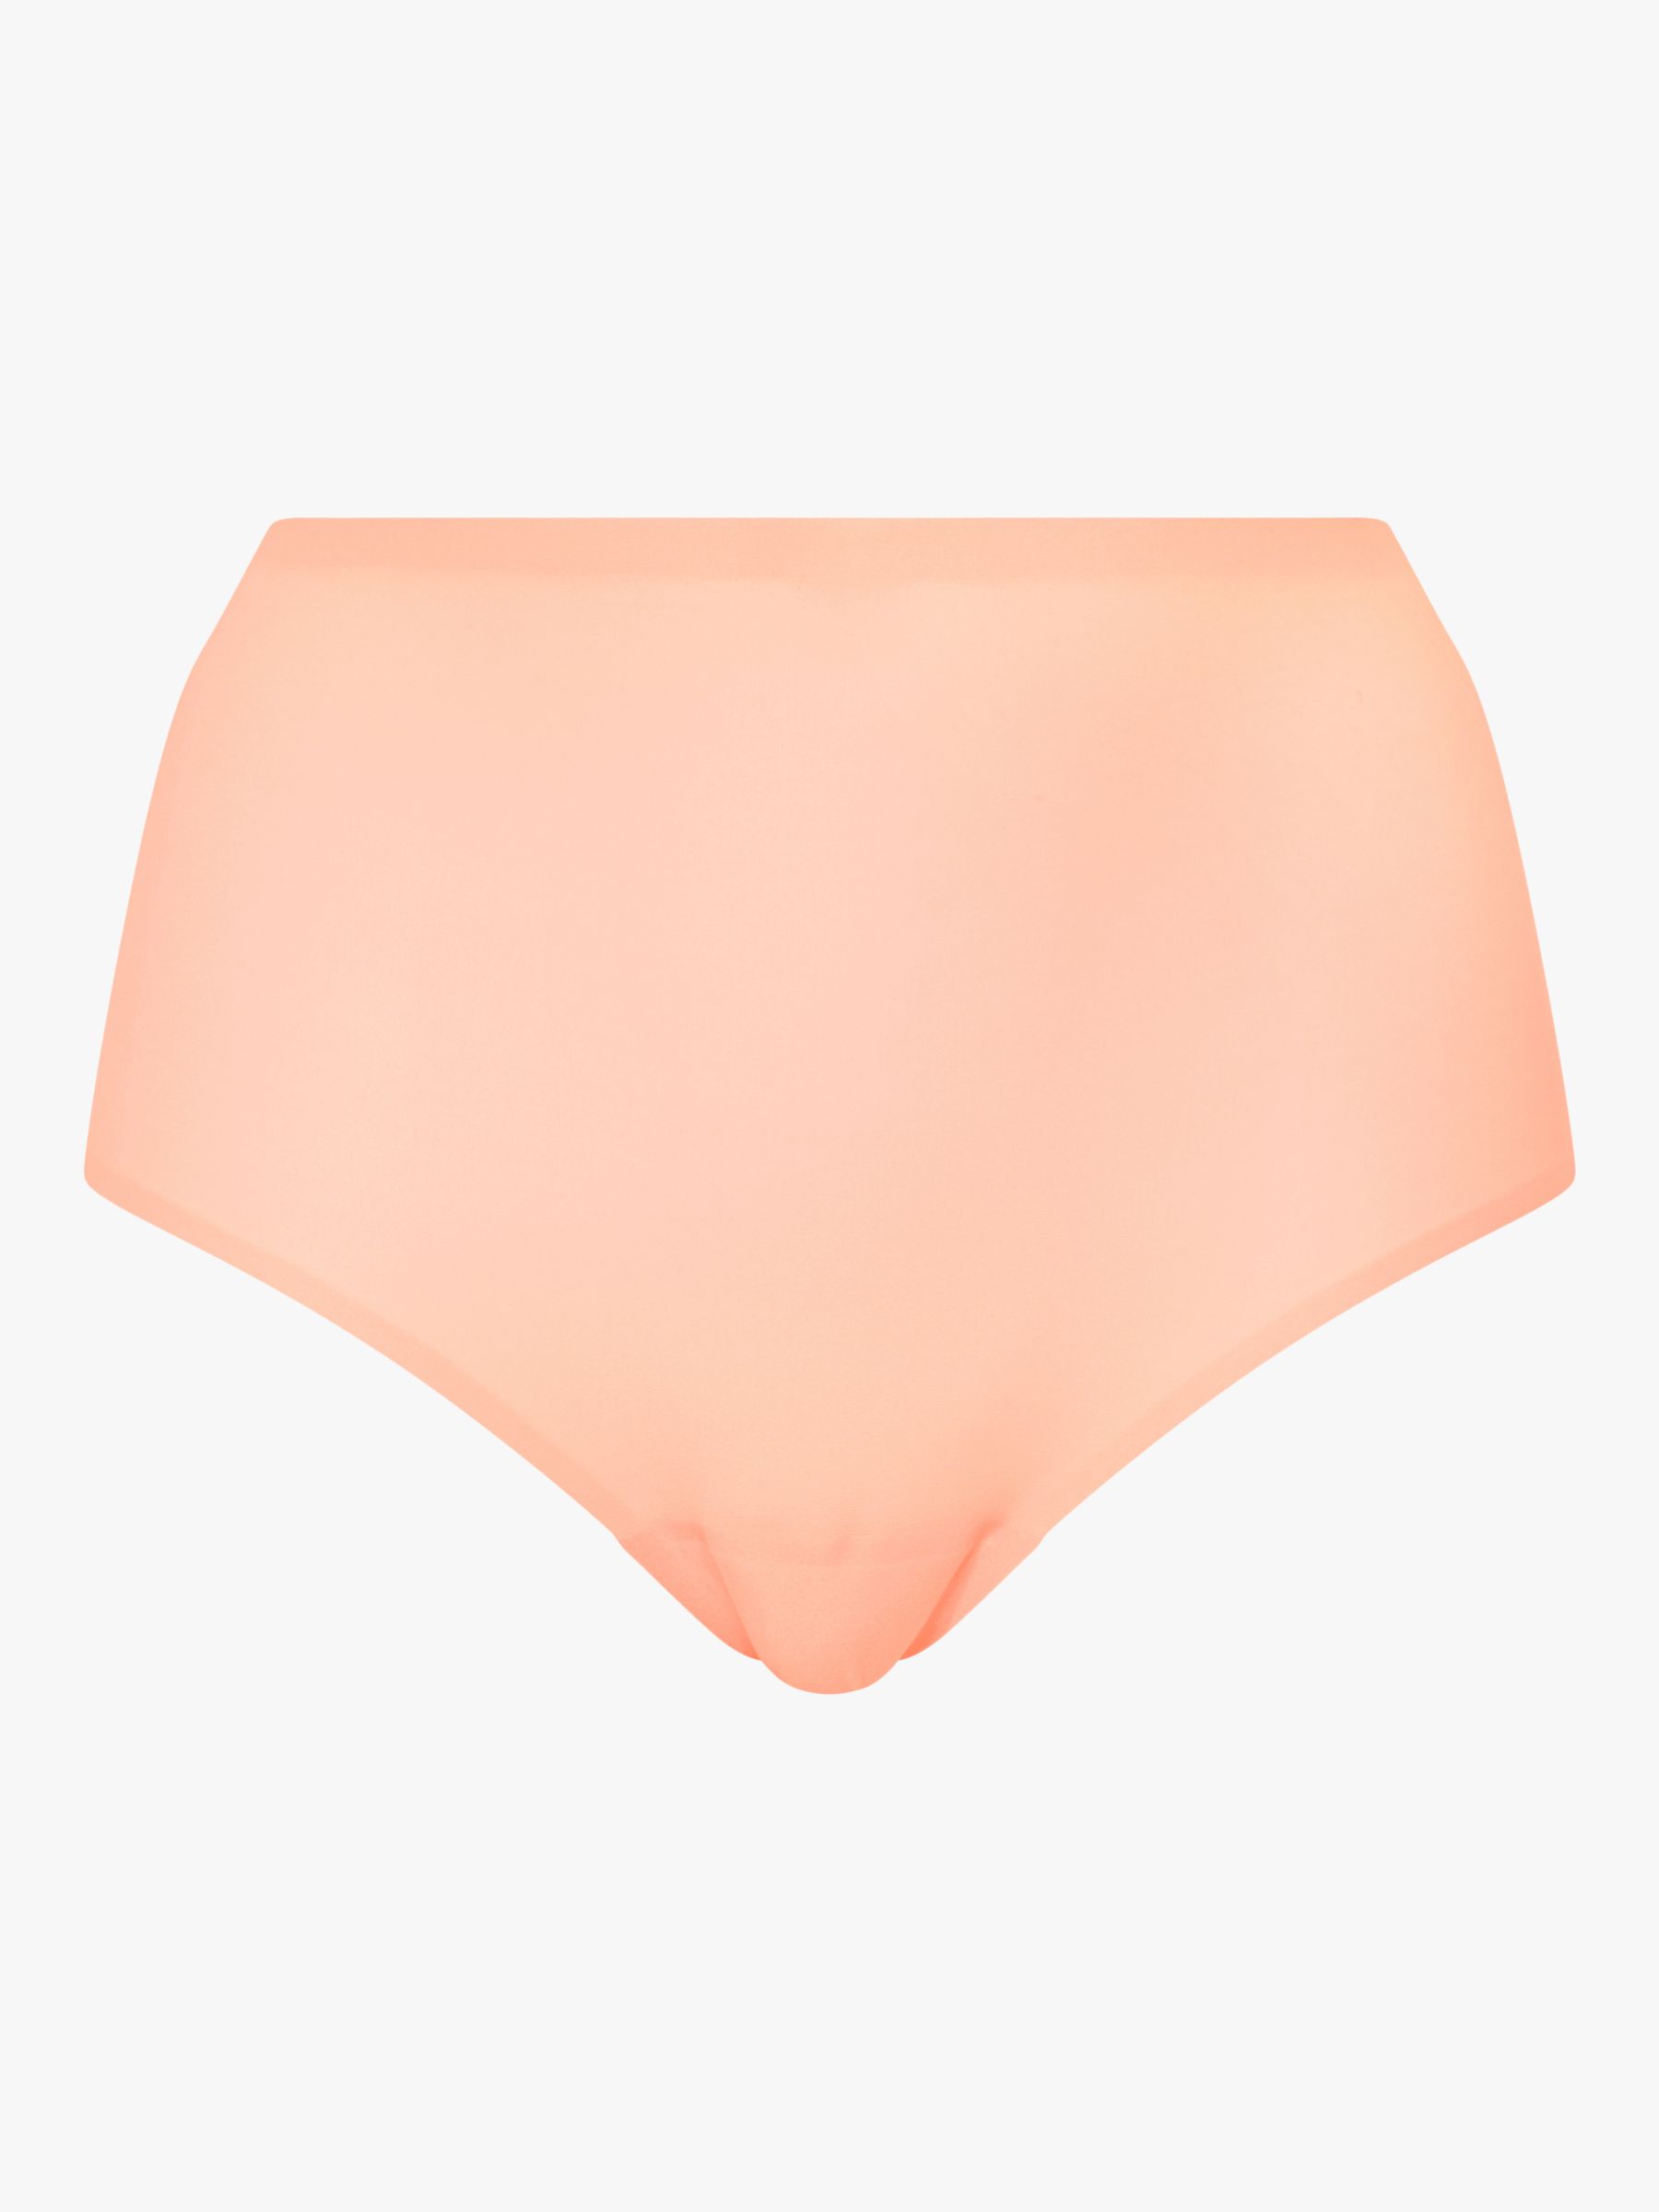 Chantelle Soft Stretch High Waisted Knickers, Tropical Peach, One Size